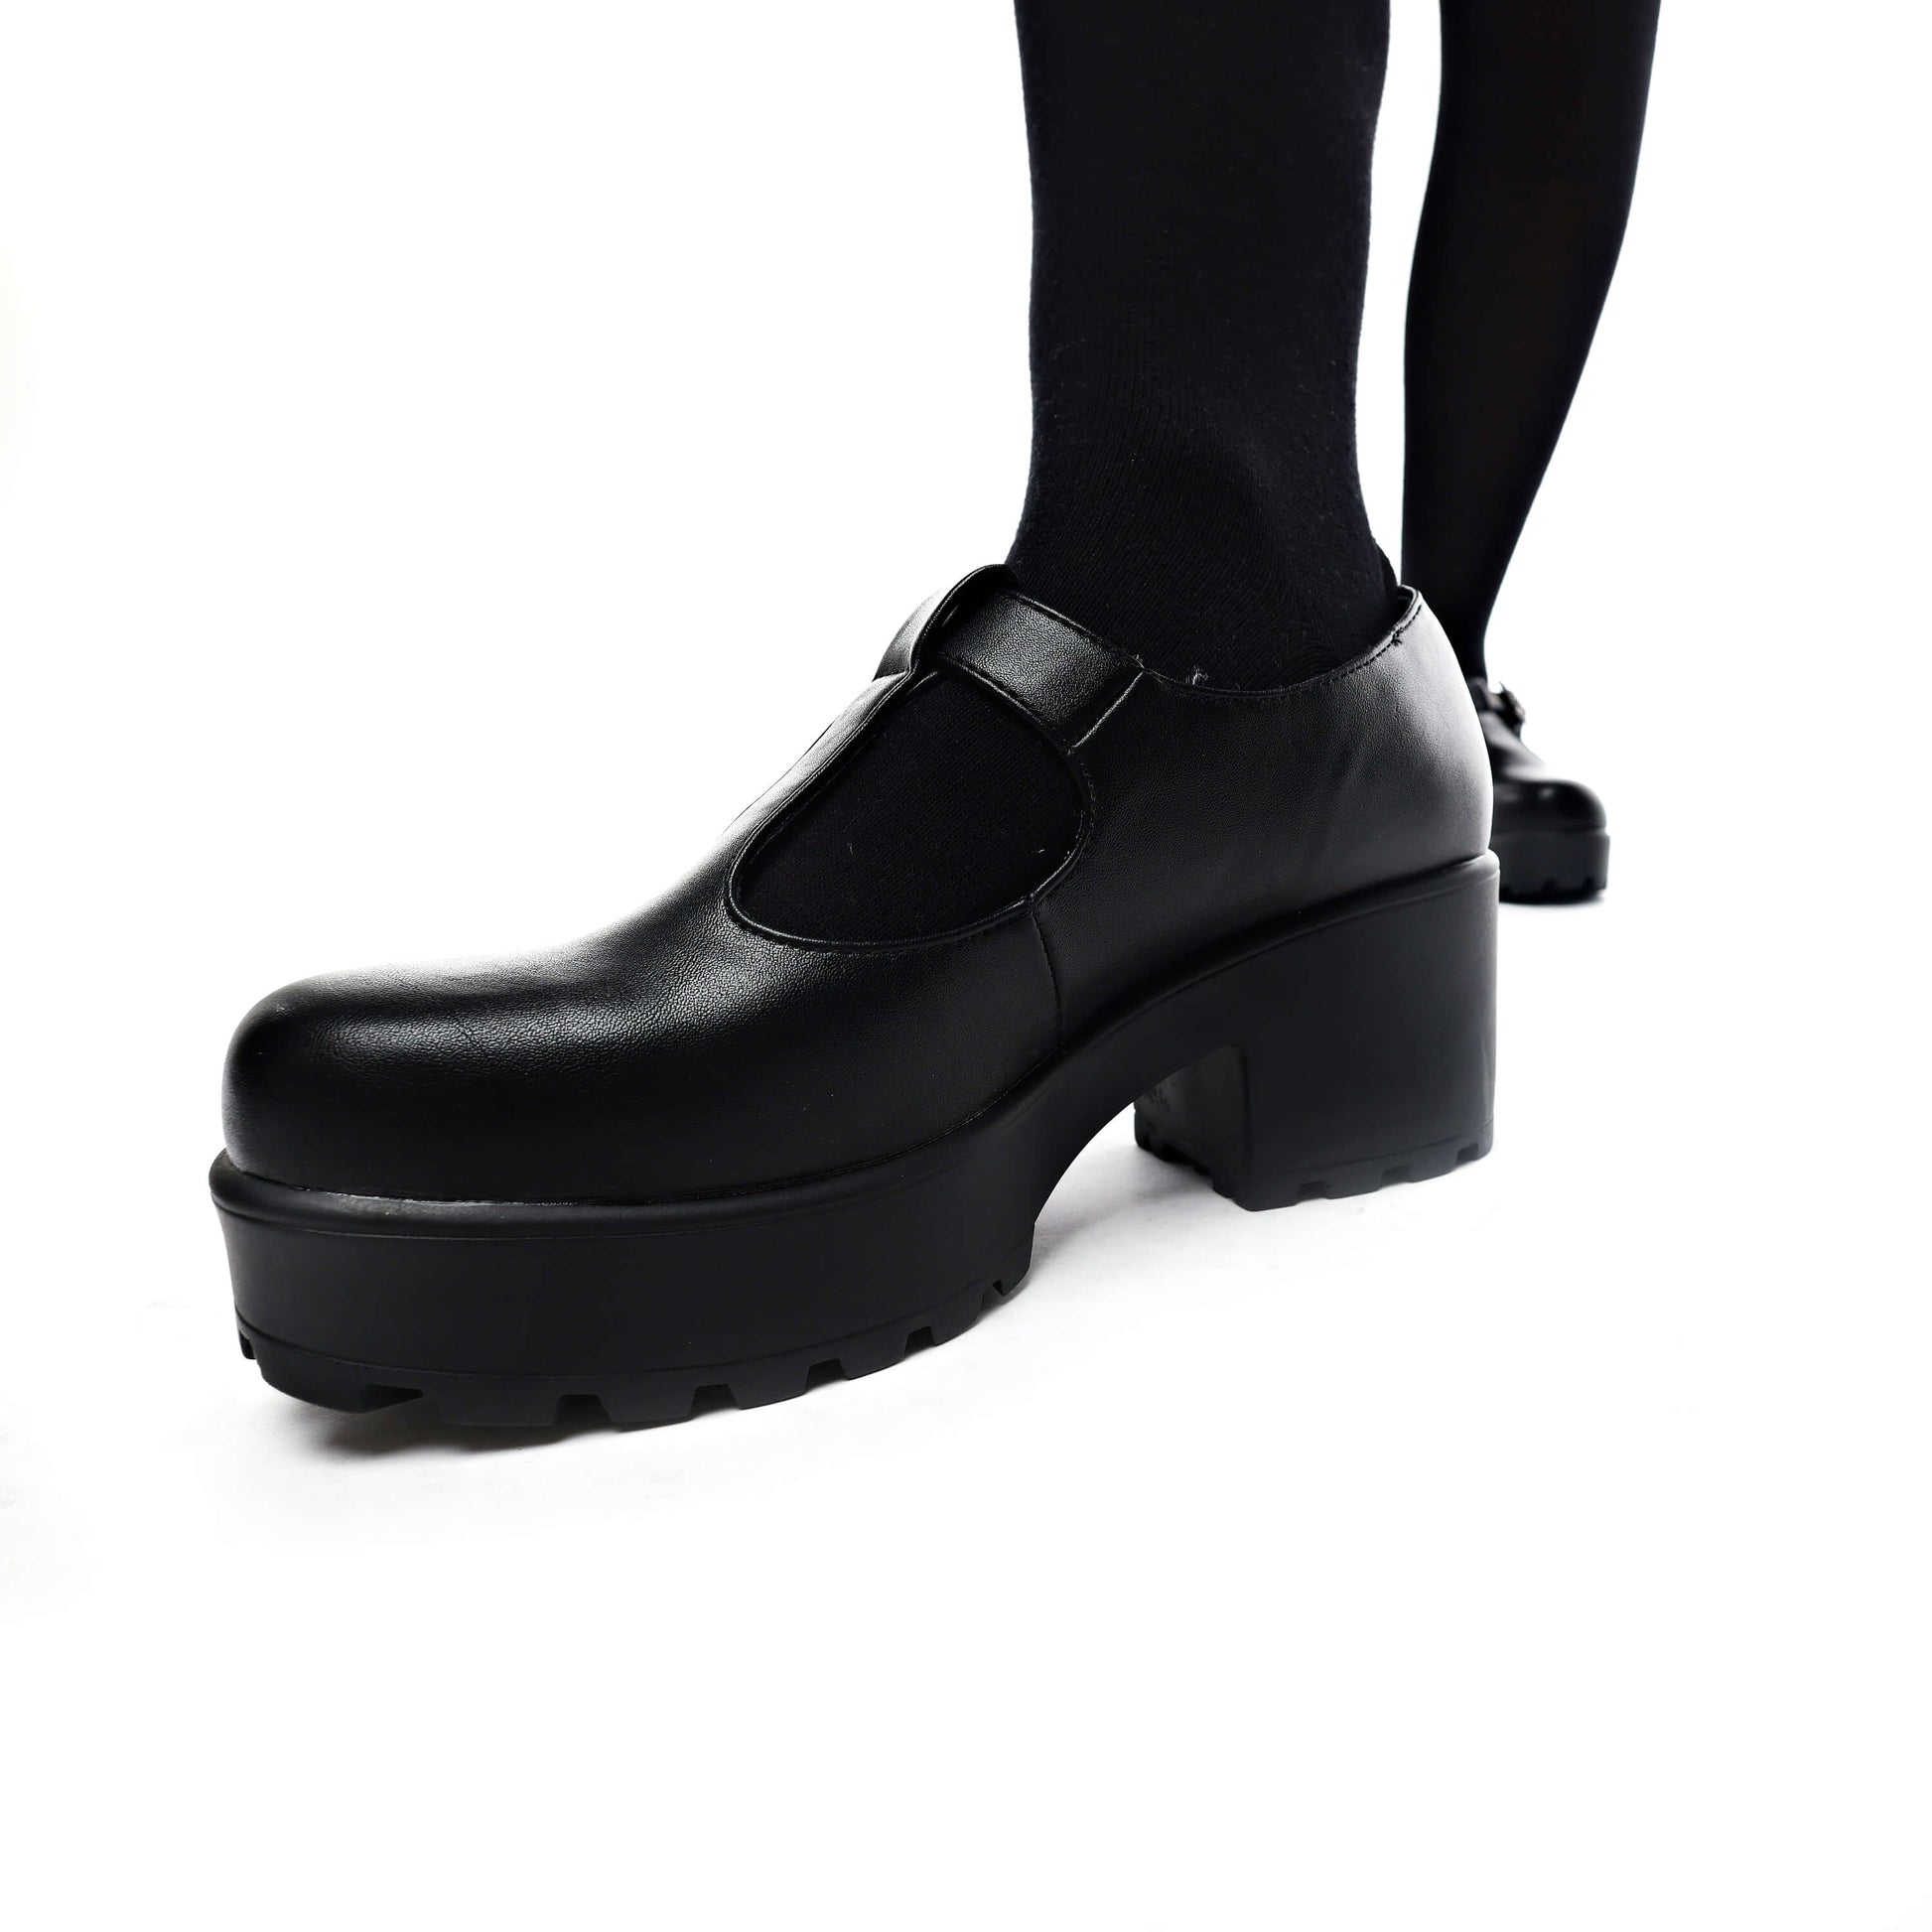 SAI Black Mary Jane Shoes 'Faux Leather Edition' - Mary Janes - KOI Footwear - Black - Model Side View